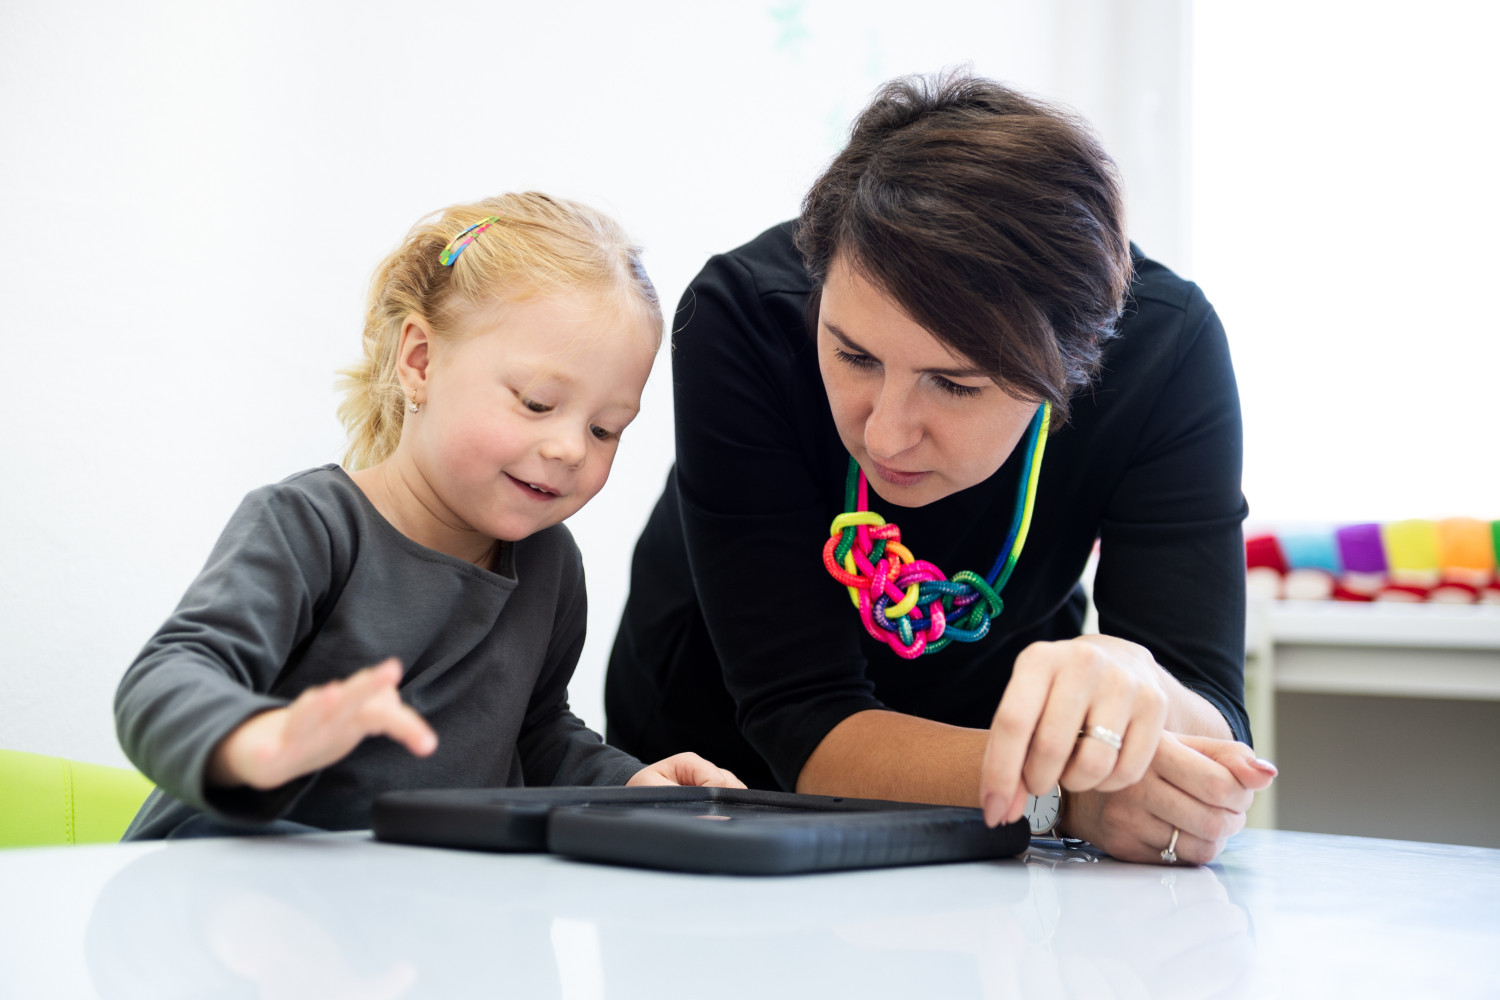 Child with disability getting therapy organised through NDIS support coordination